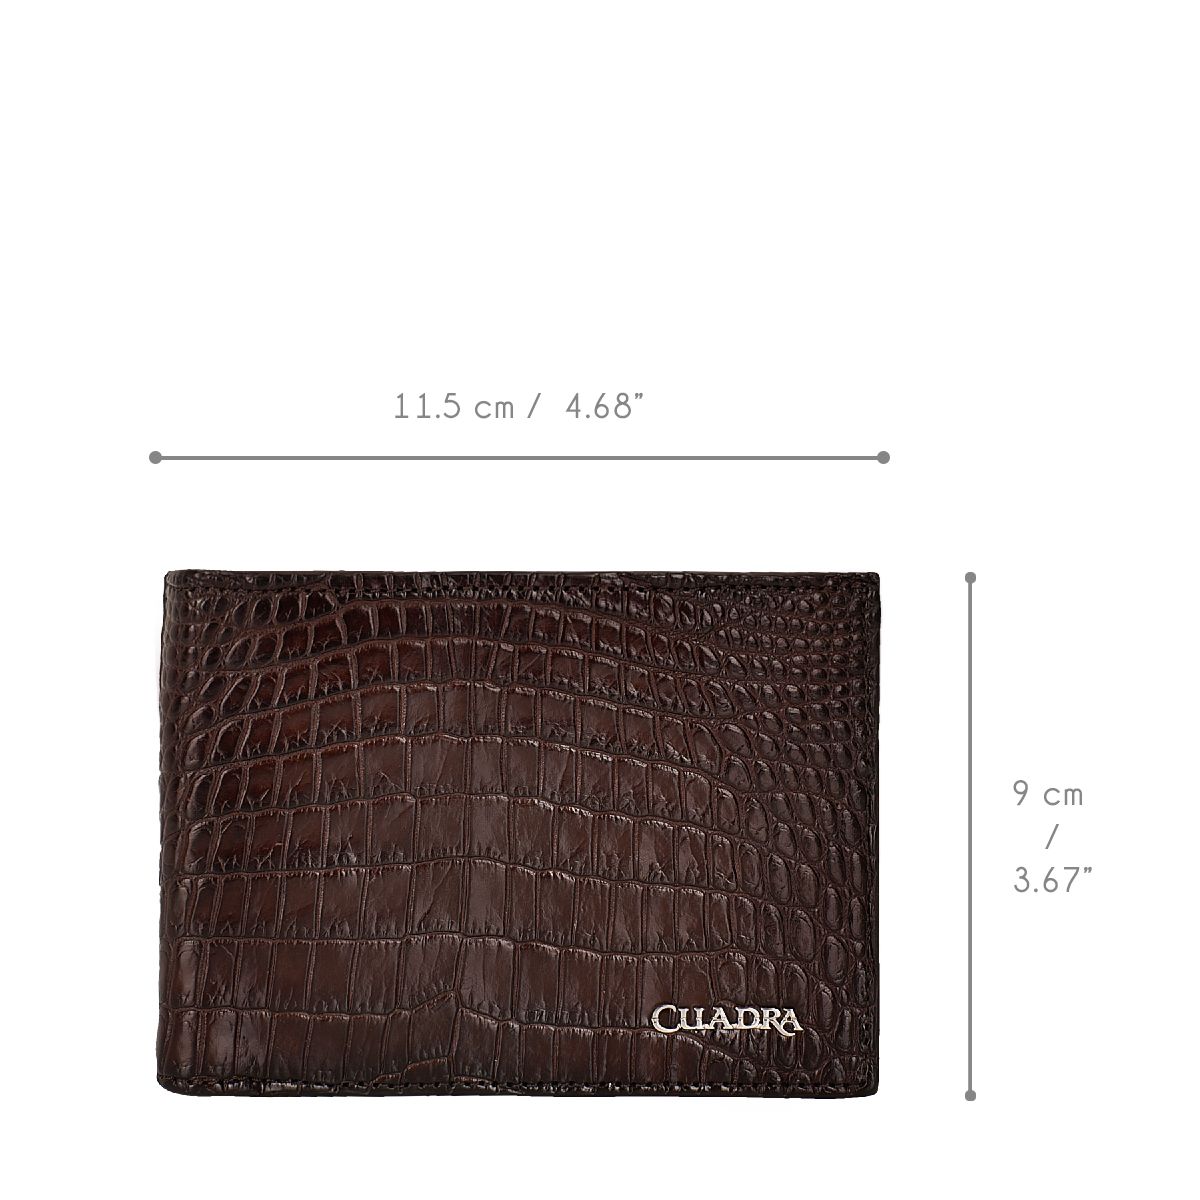 BC003NL - Cuadra brown classic niloticus exotic bifold wallet for men.-Kuet.us